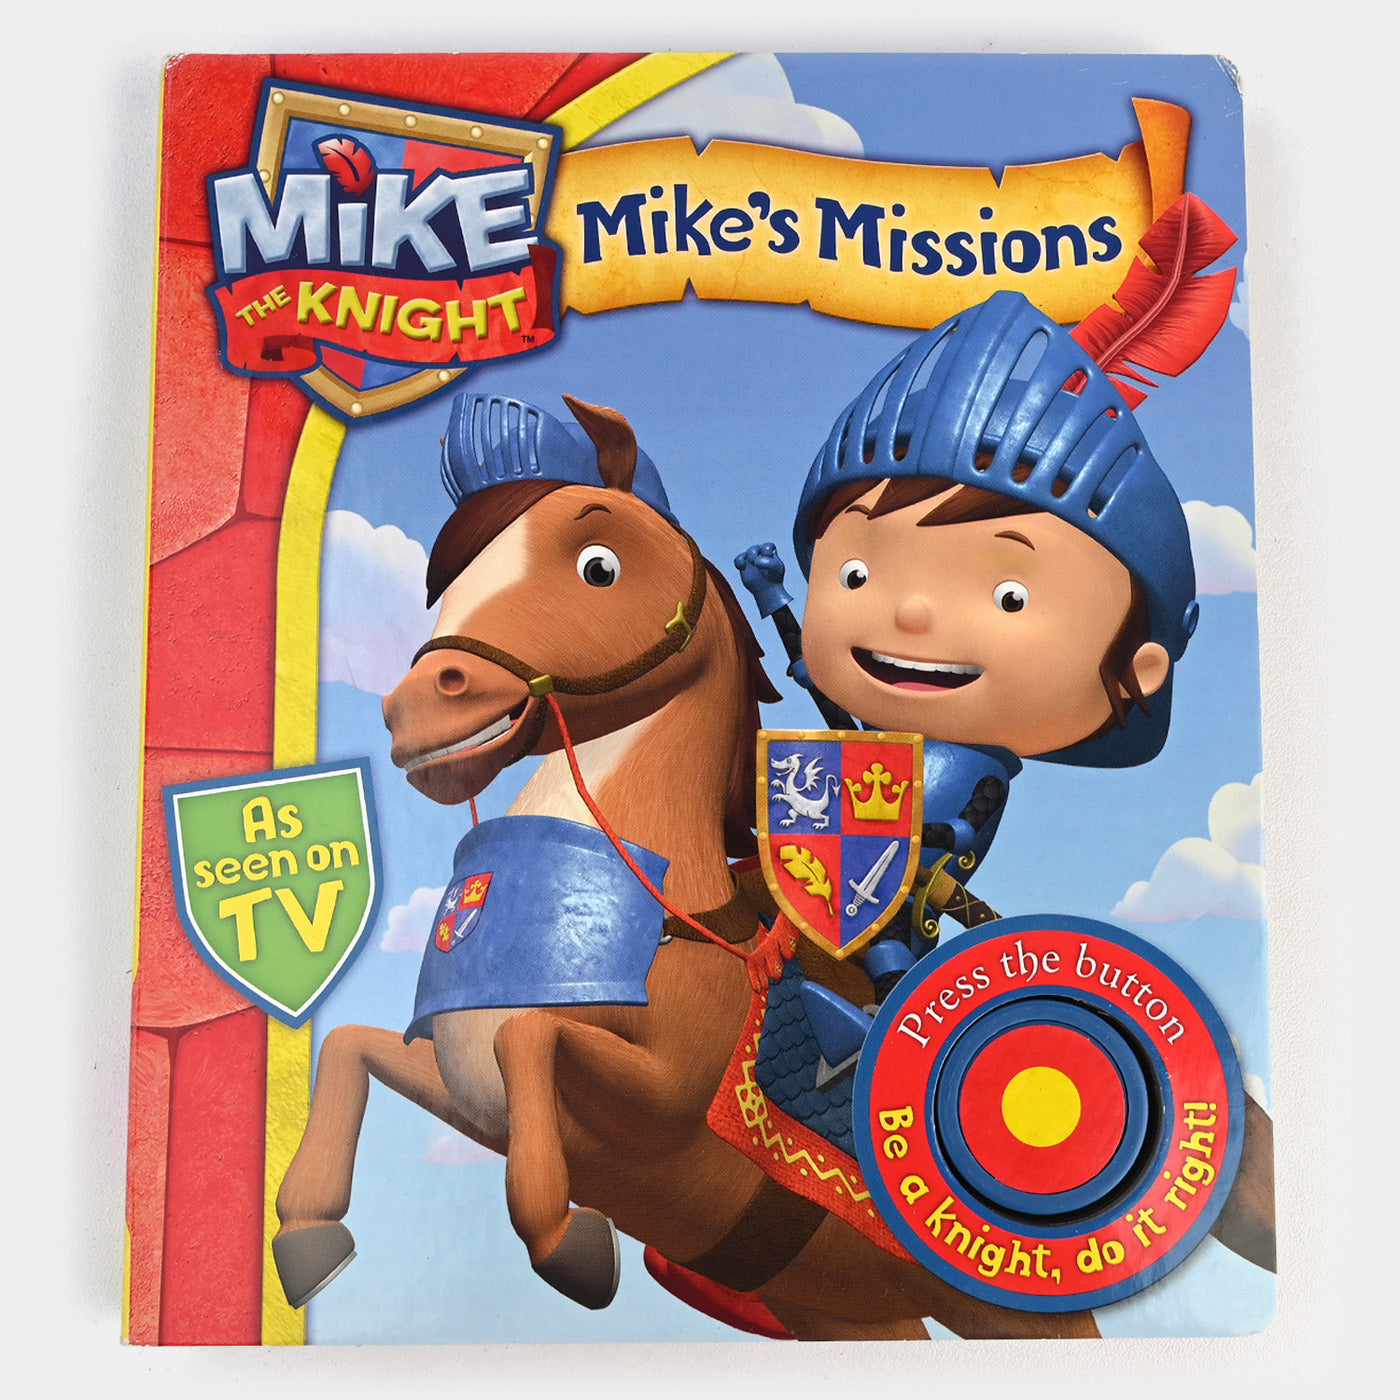 Mikes Mission Book For Kids